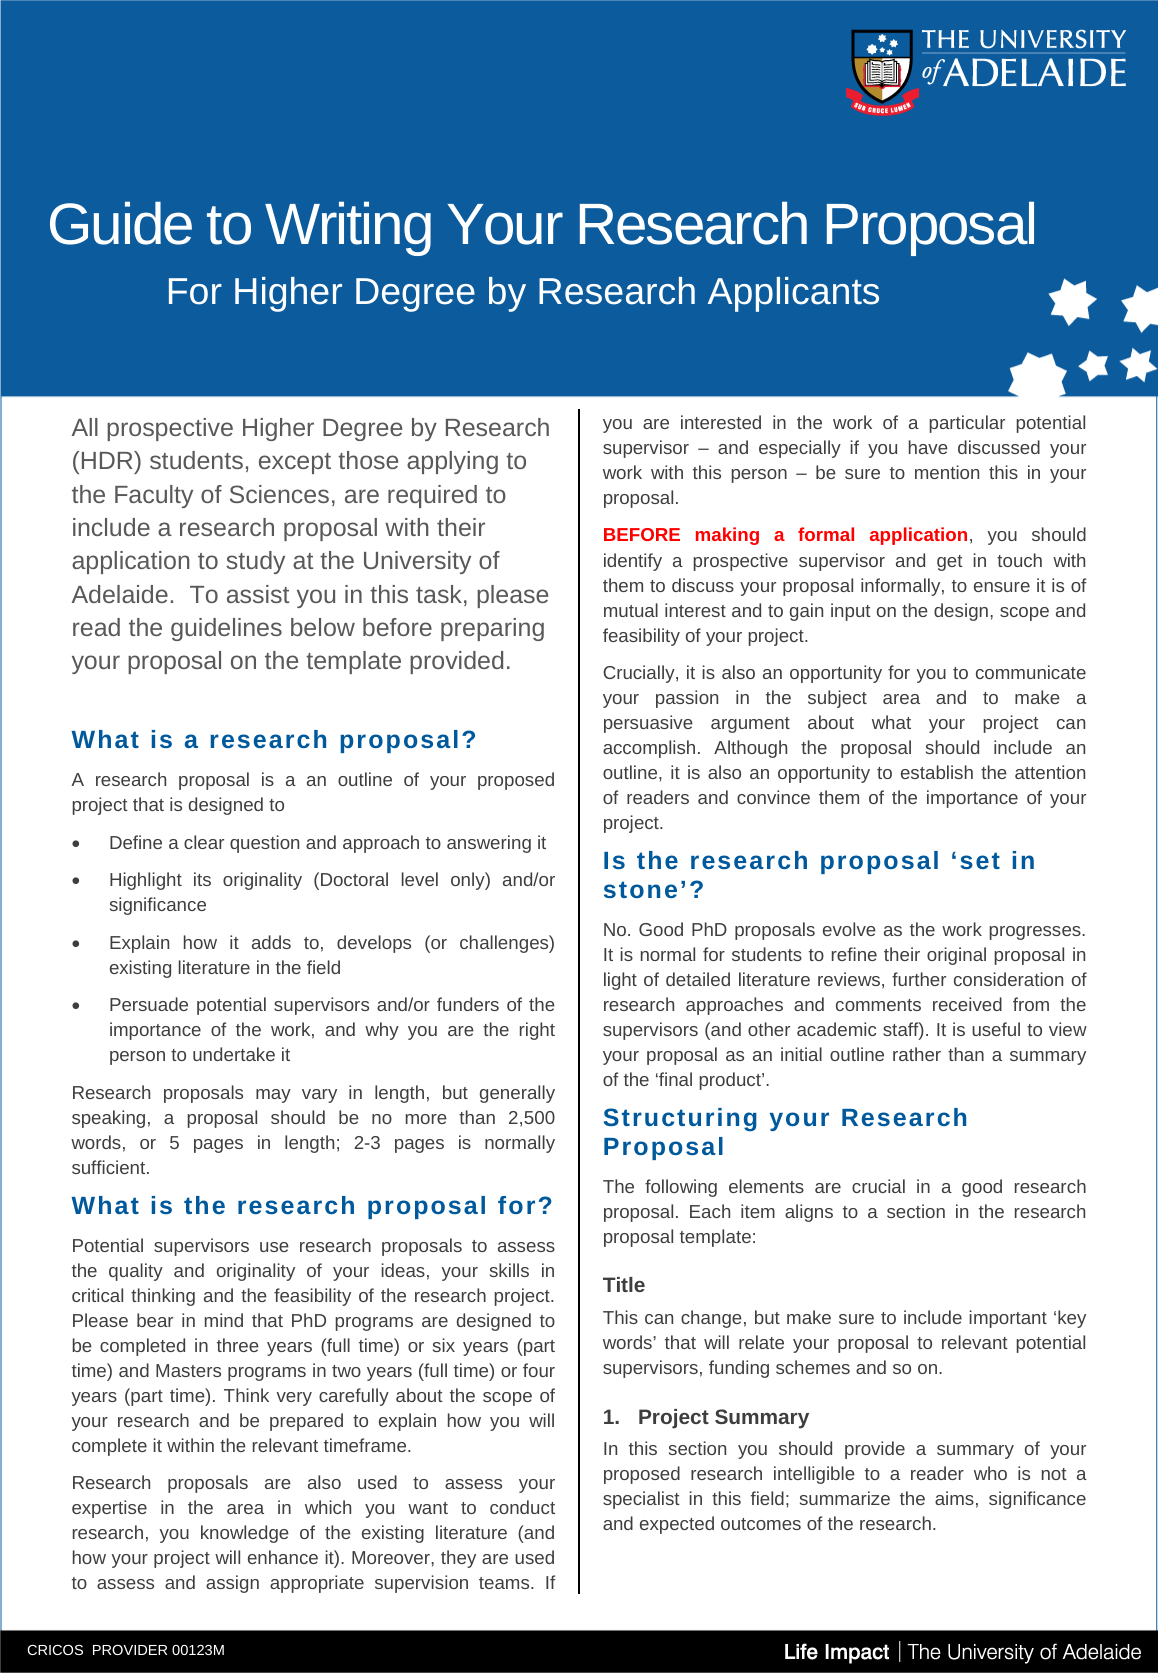 Page 1 of 3 - Research-proposal--guide